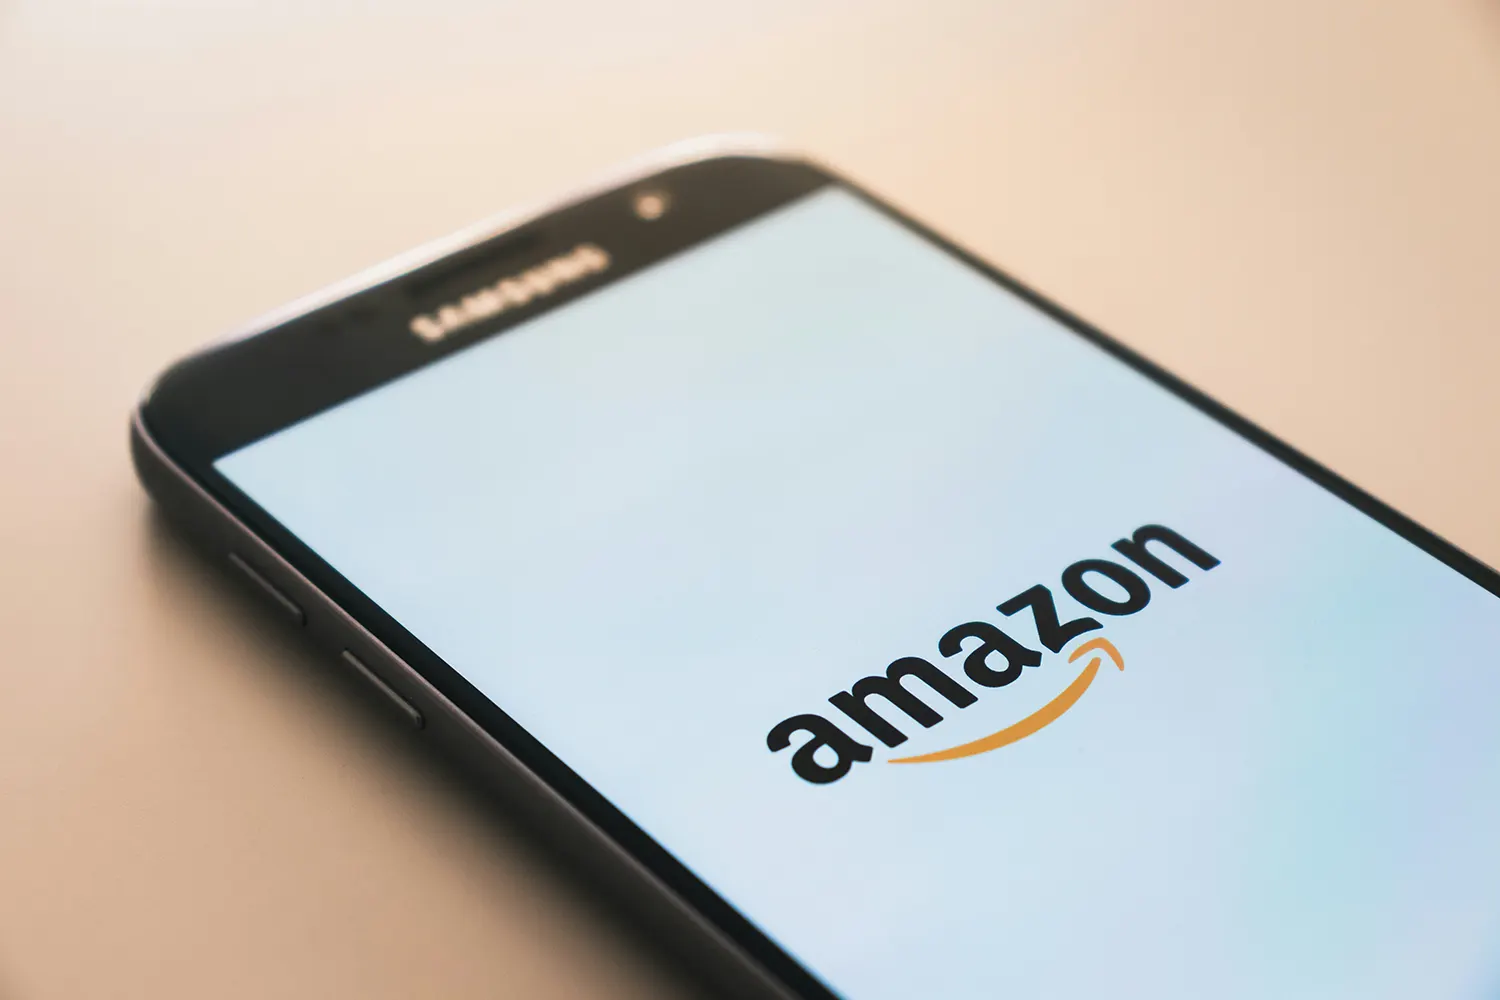 6 Reasons Why Your Small Business Should Sell on Amazon